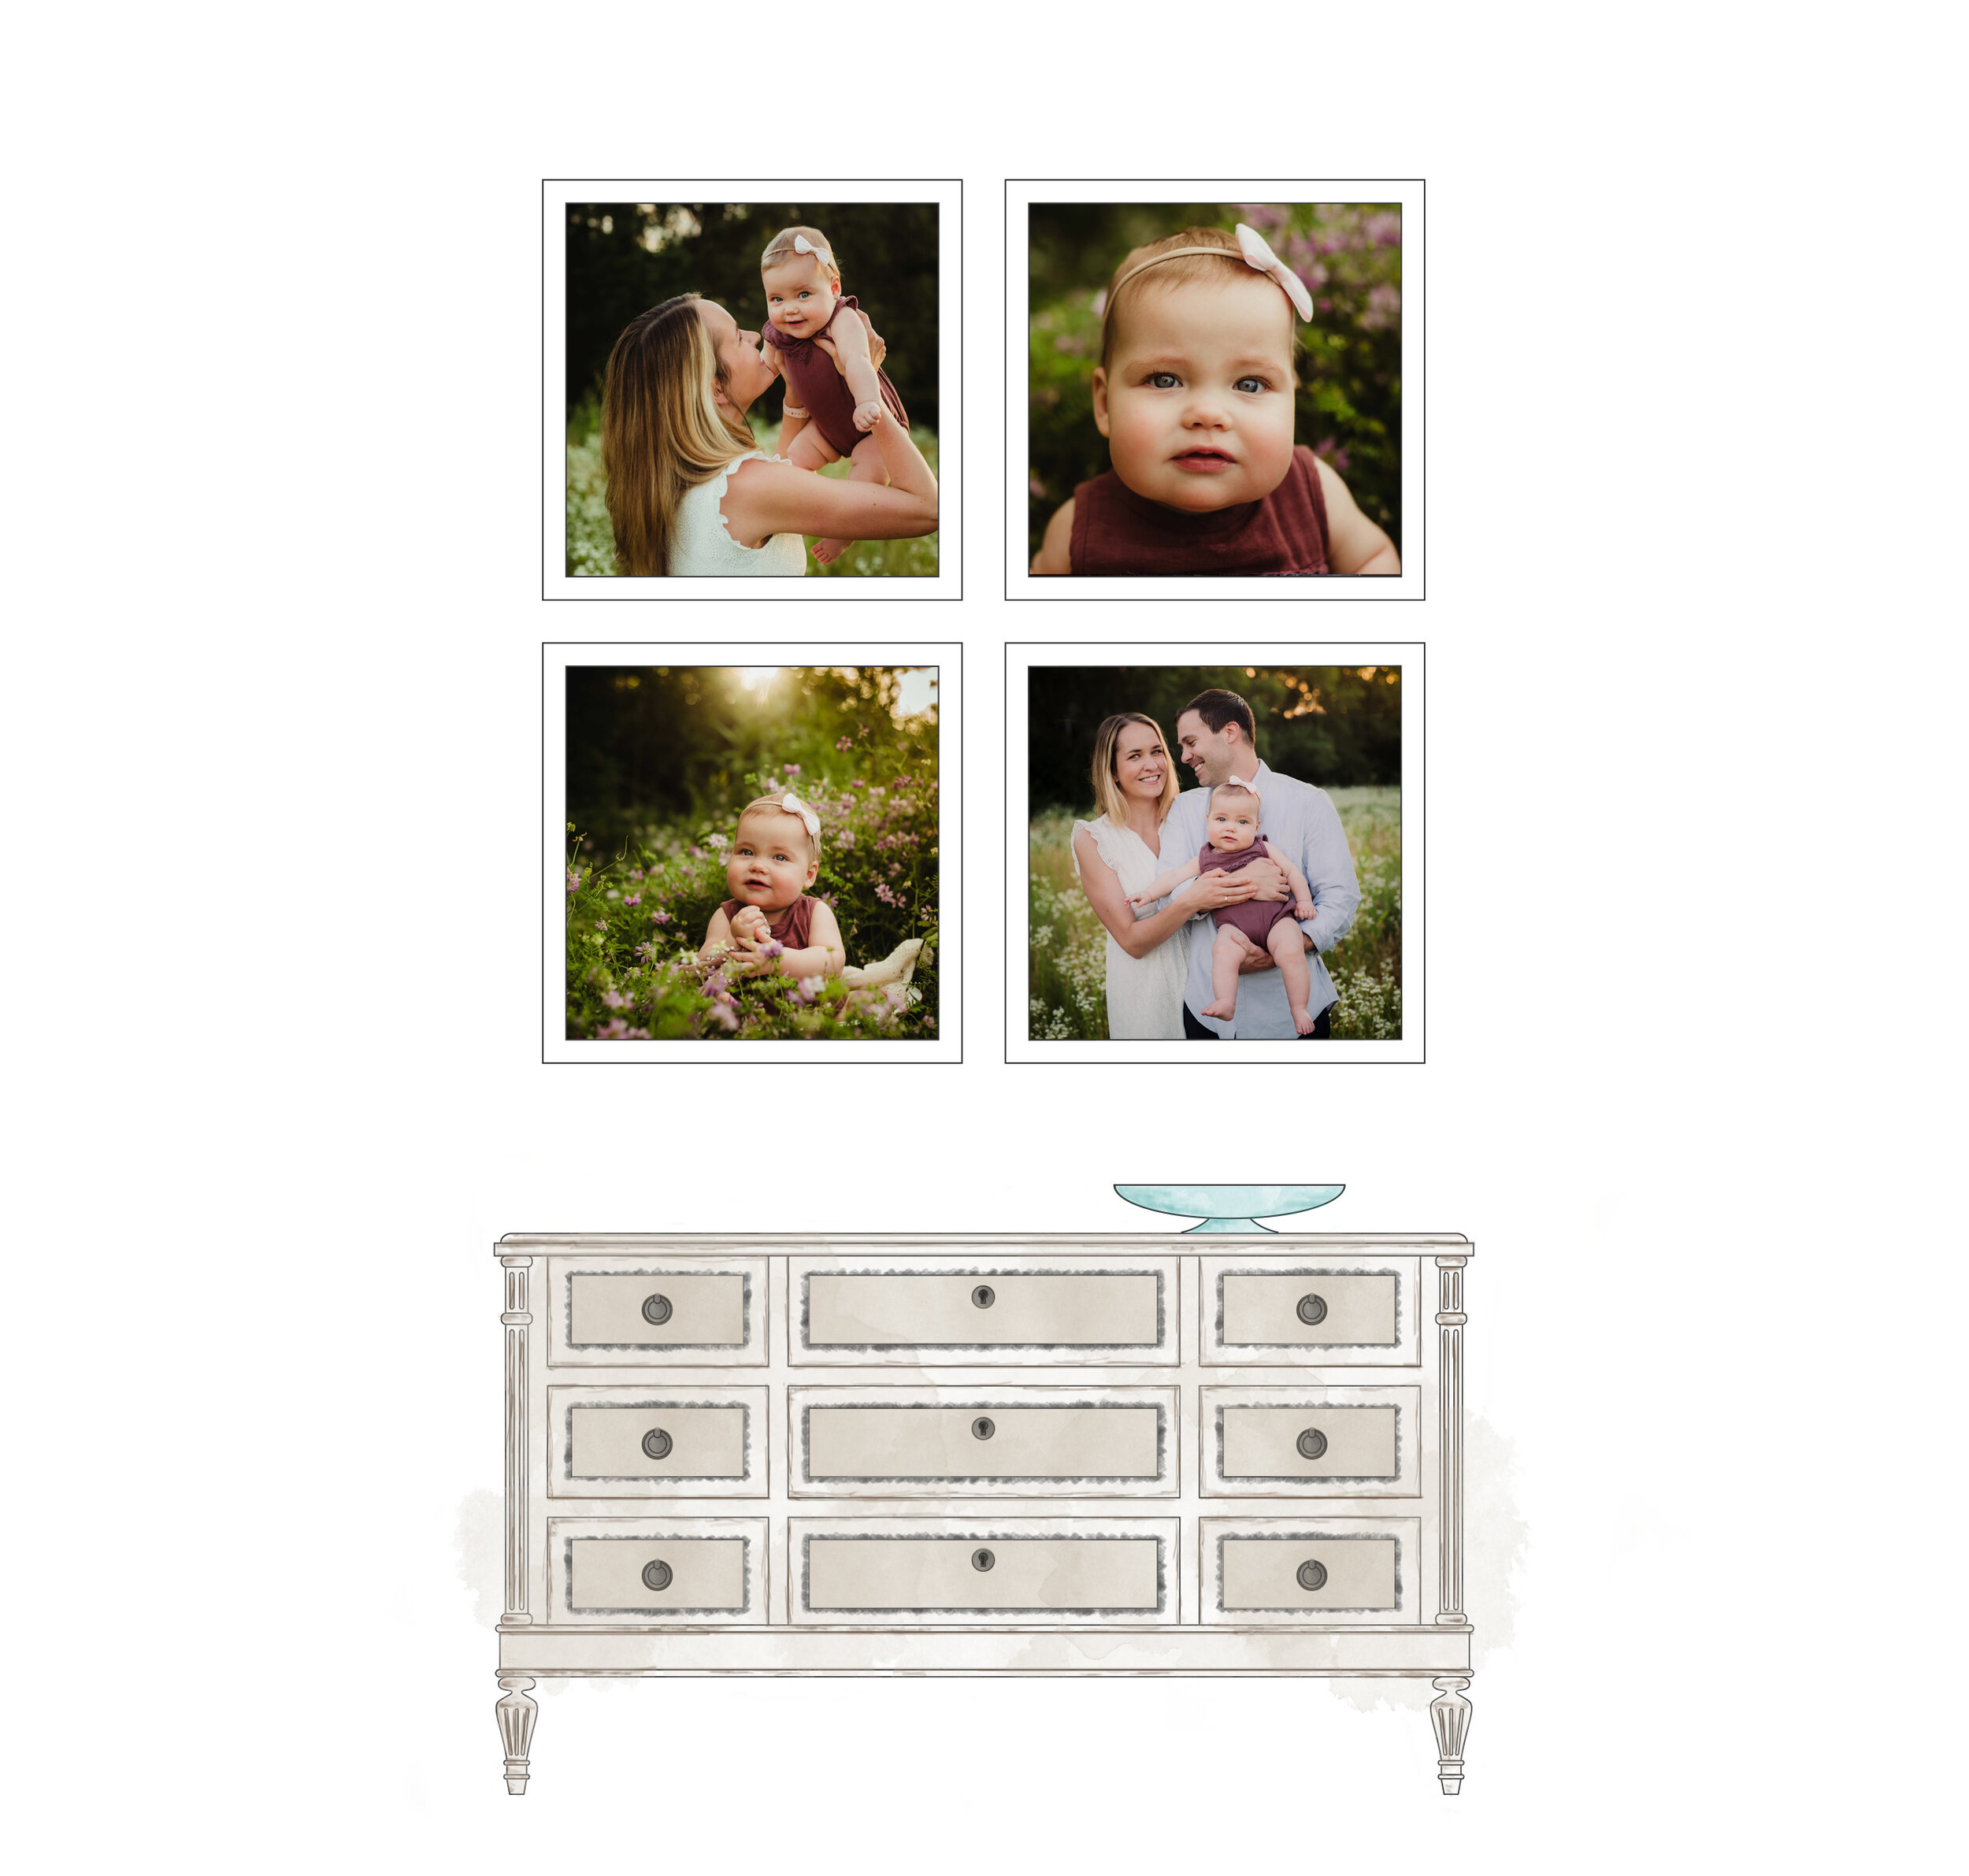 Family Gallery Wall Ideas With 4 Large Prints